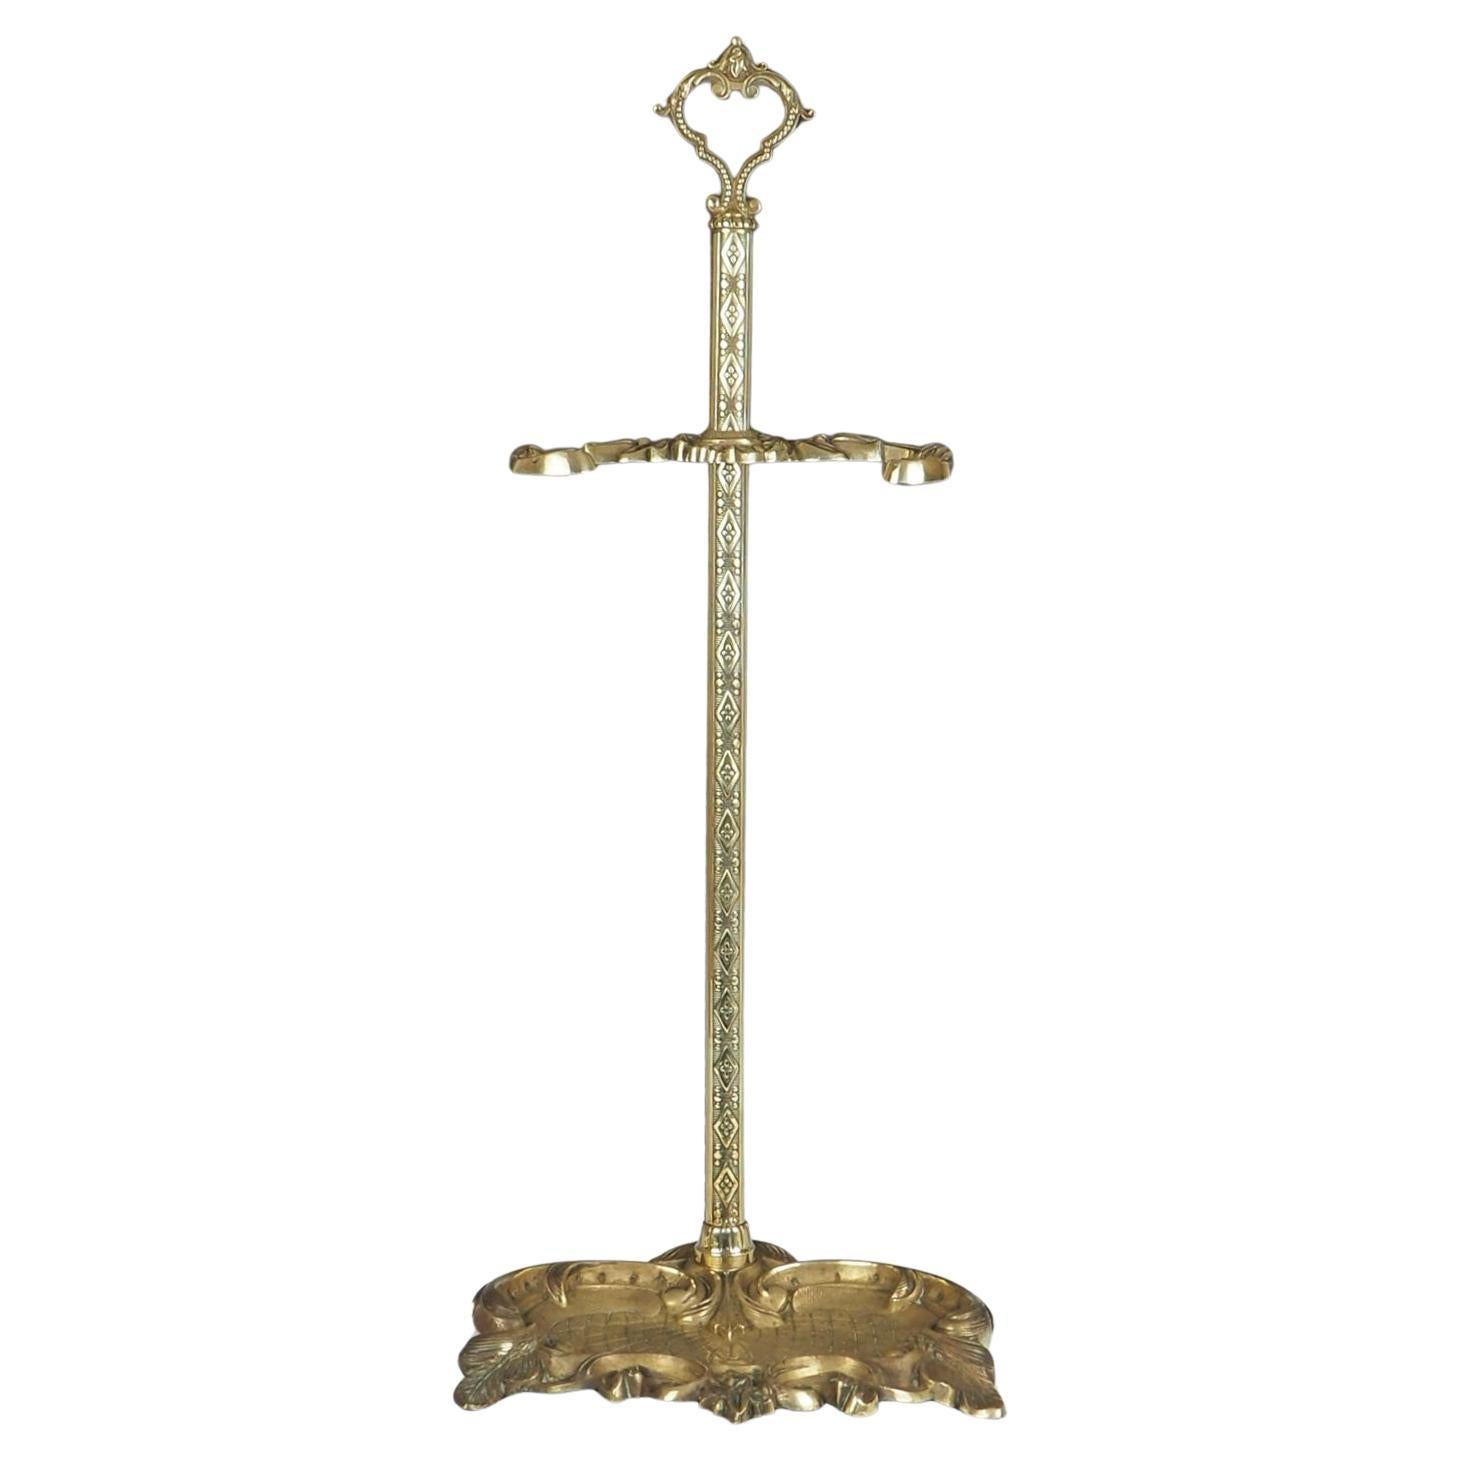 Antique Rococo Revival Brass Fireside Tool Stand